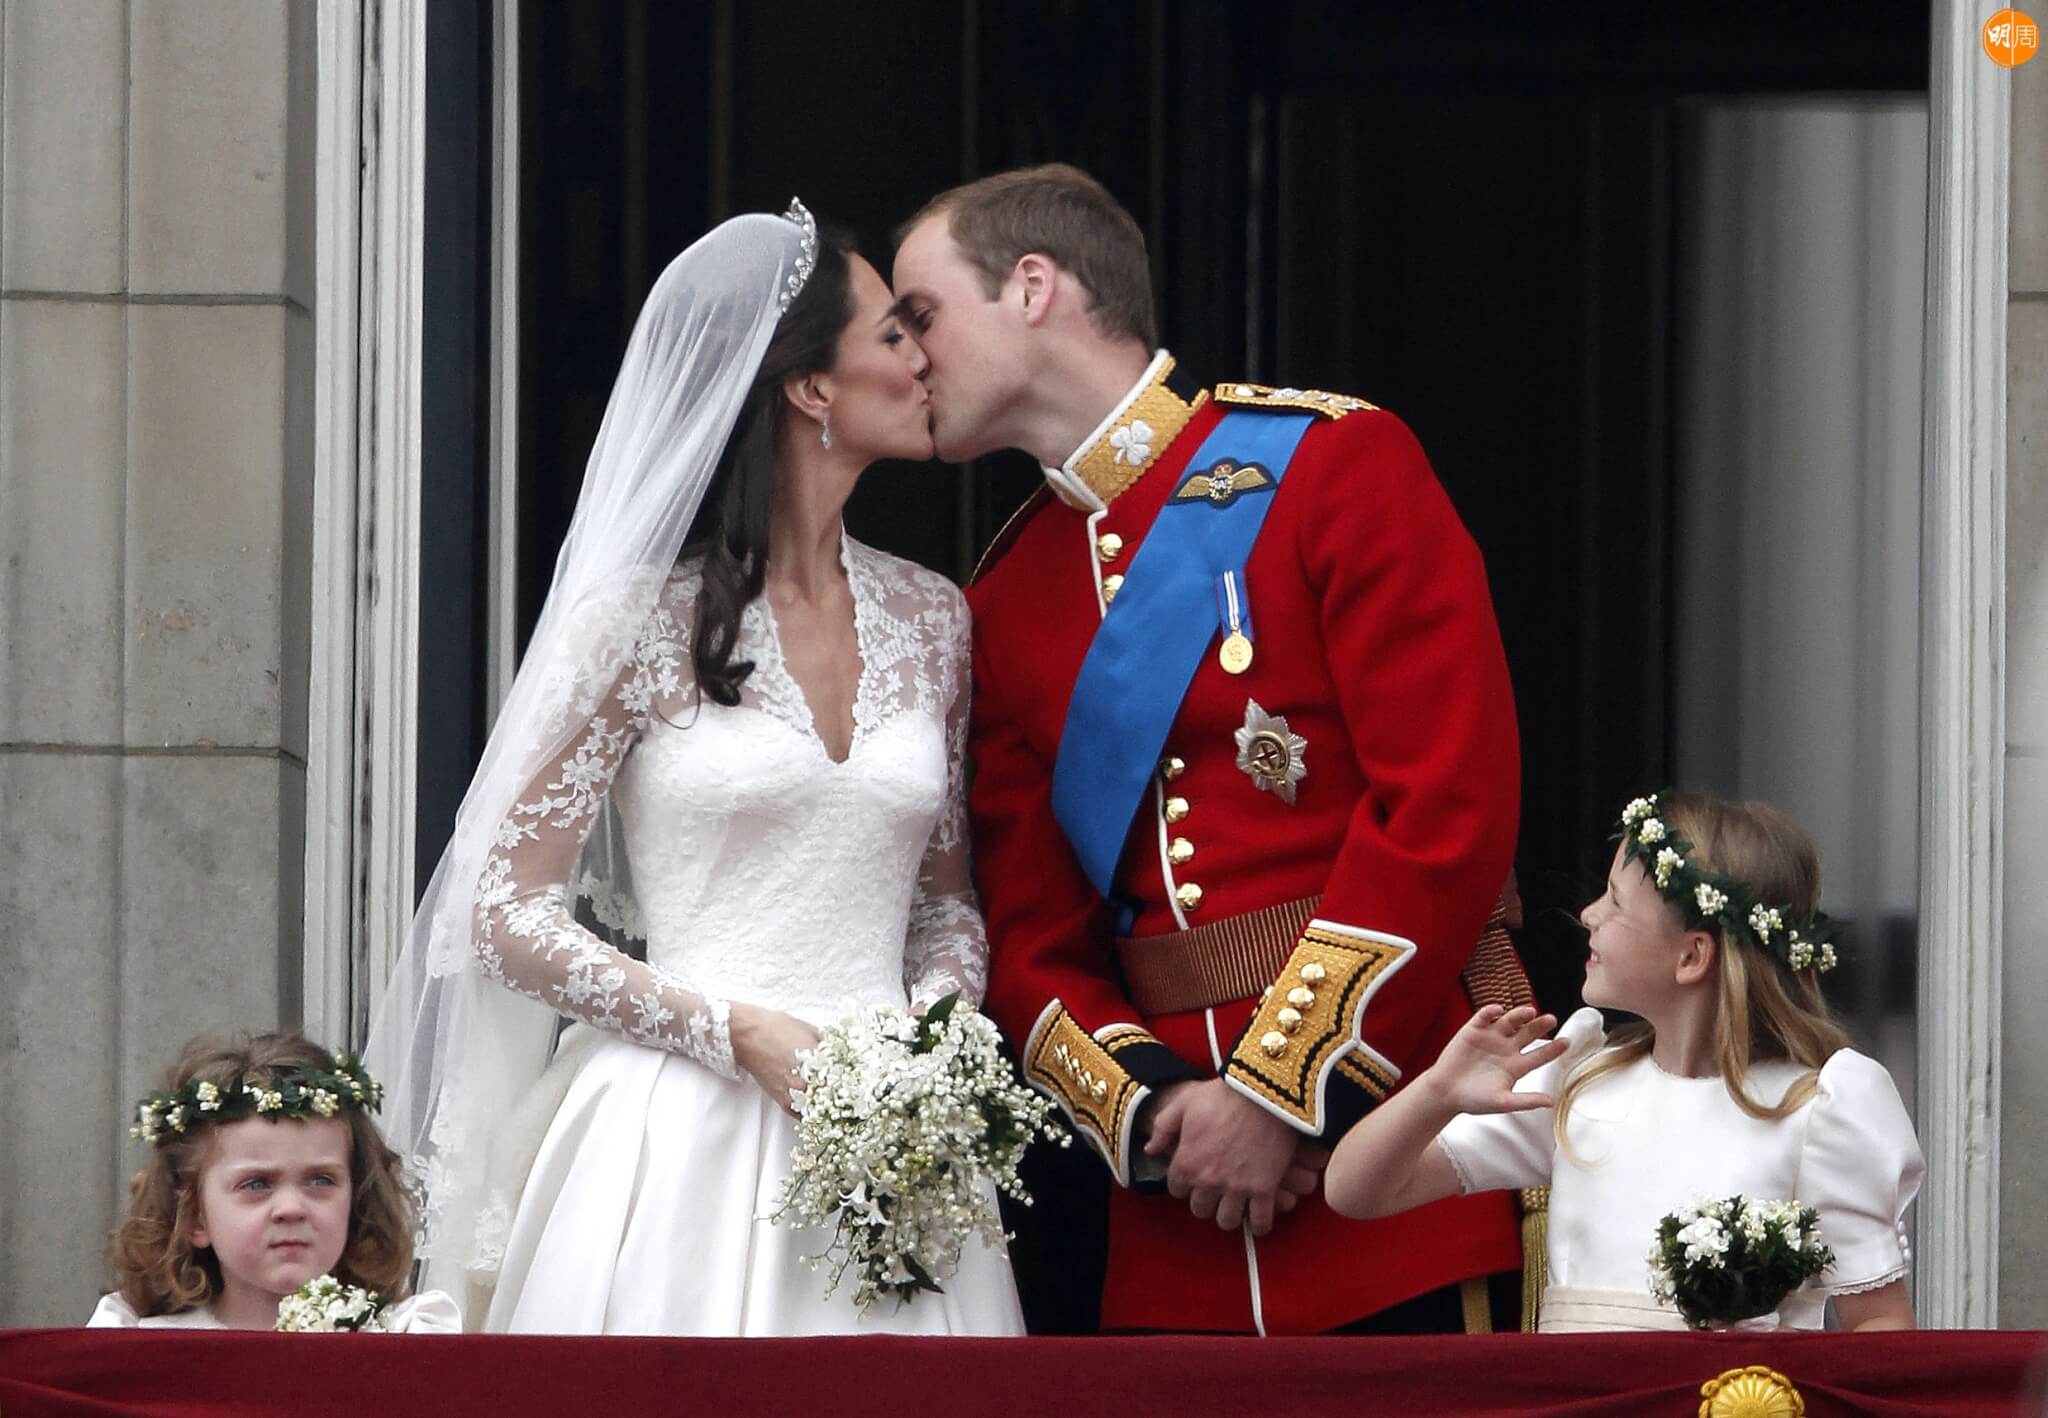 LONDON, ENGLAND - APRIL 29: TRH Catherine, Duchess of Cambridge and Prince William, Duke of Cambridge kiss on the balcony at Buckingham Palace on April 29, 2011 in London, England. The marriage of the second in line to the British throne was led by the Archbishop of Canterbury and was attended by 1900 guests, including foreign Royal family members and heads of state. Thousands of well-wishers from around the world have also flocked to London to witness the spectacle and pageantry of the Royal Wedding. (Photo by Christopher Furlong/Getty Images) (Photo by Christopher Furlong / GETTY IMAGES EUROPE / Getty Images via AFP)